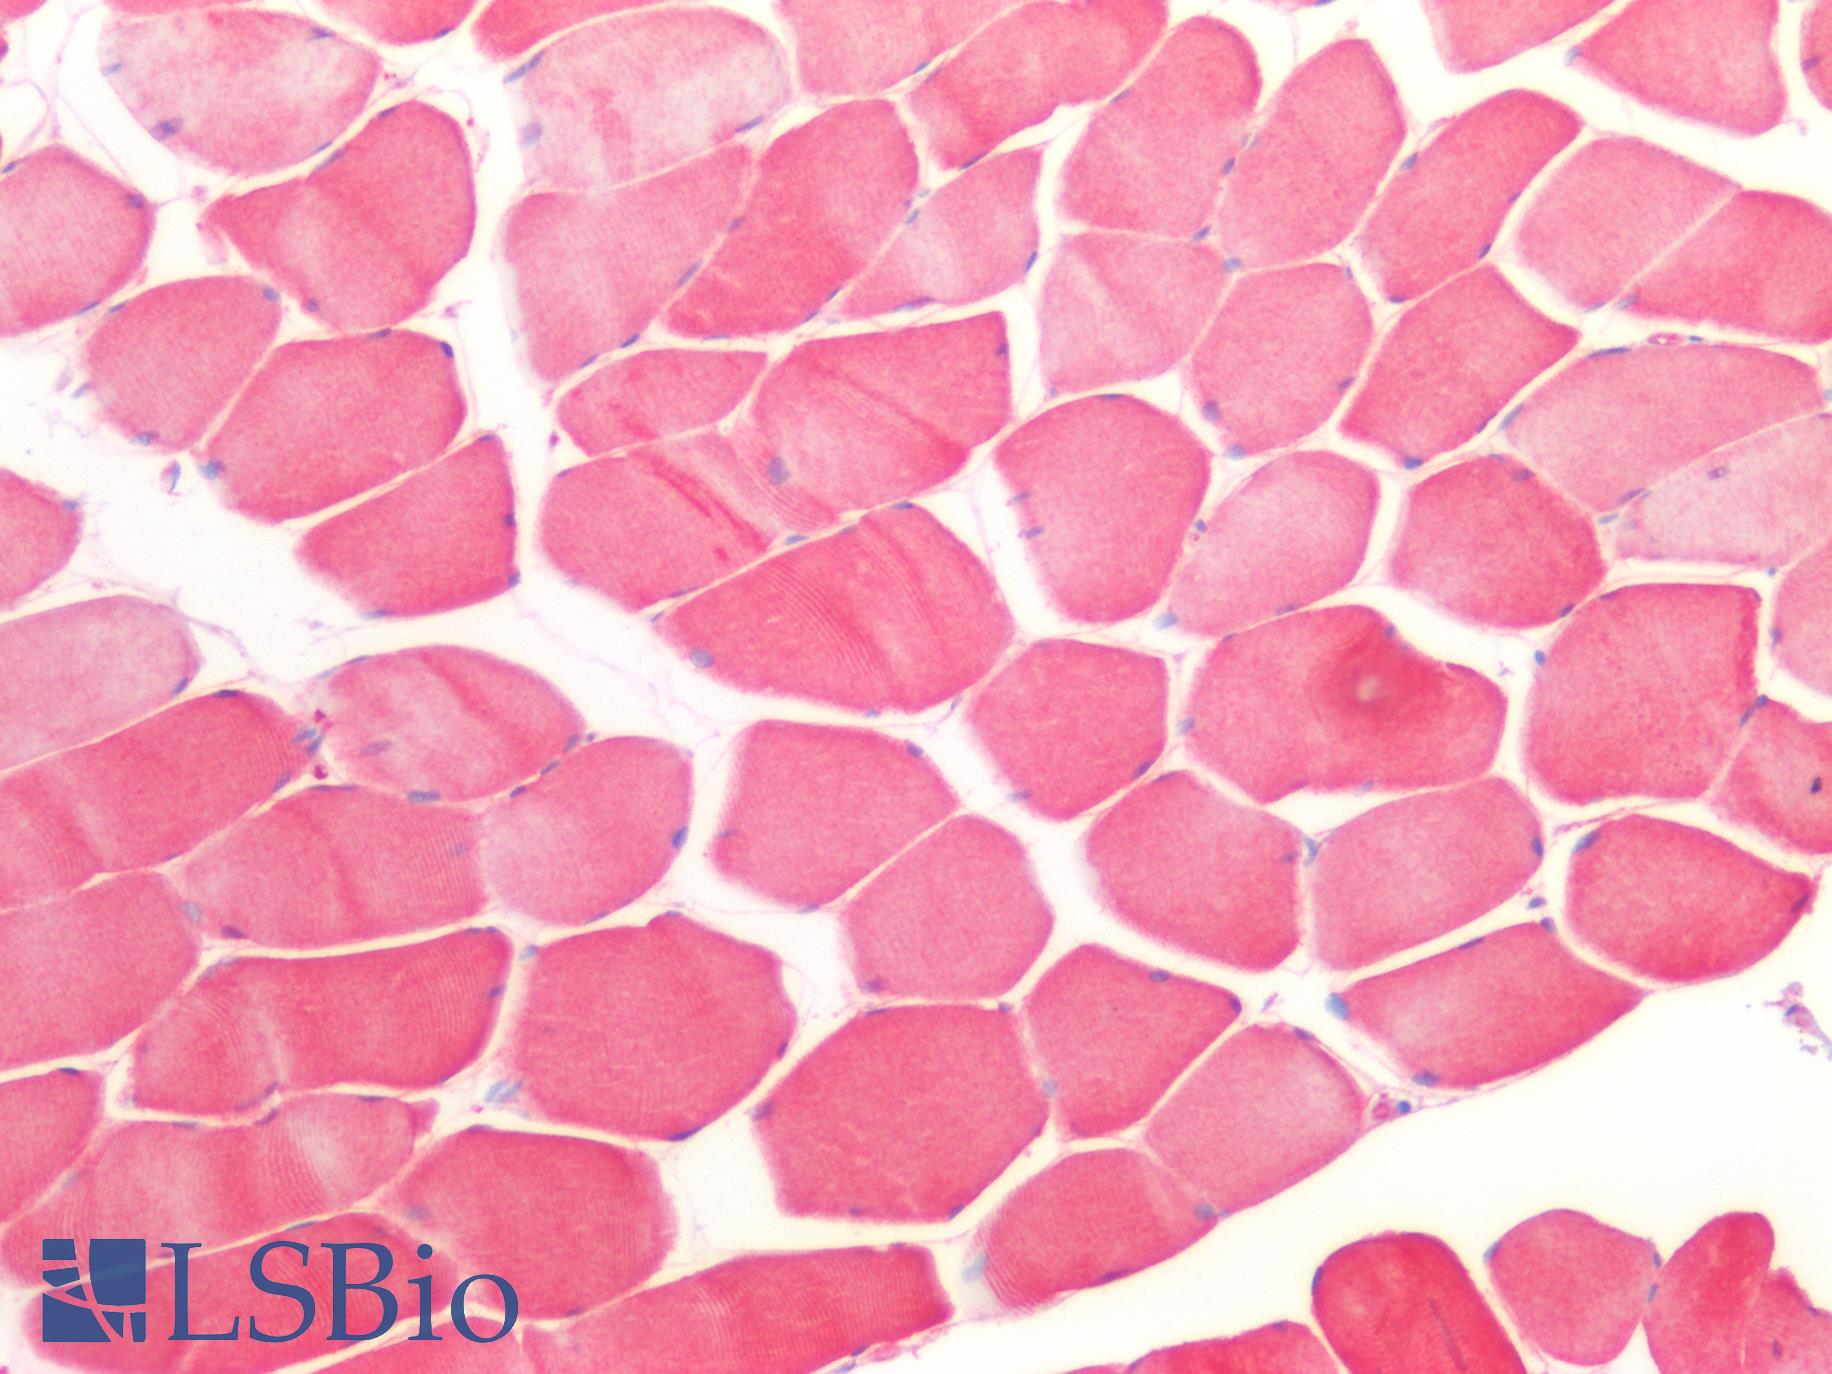 CFL2 / Cofilin 2 Antibody - Human Skeletal Muscle: Formalin-Fixed, Paraffin-Embedded (FFPE)